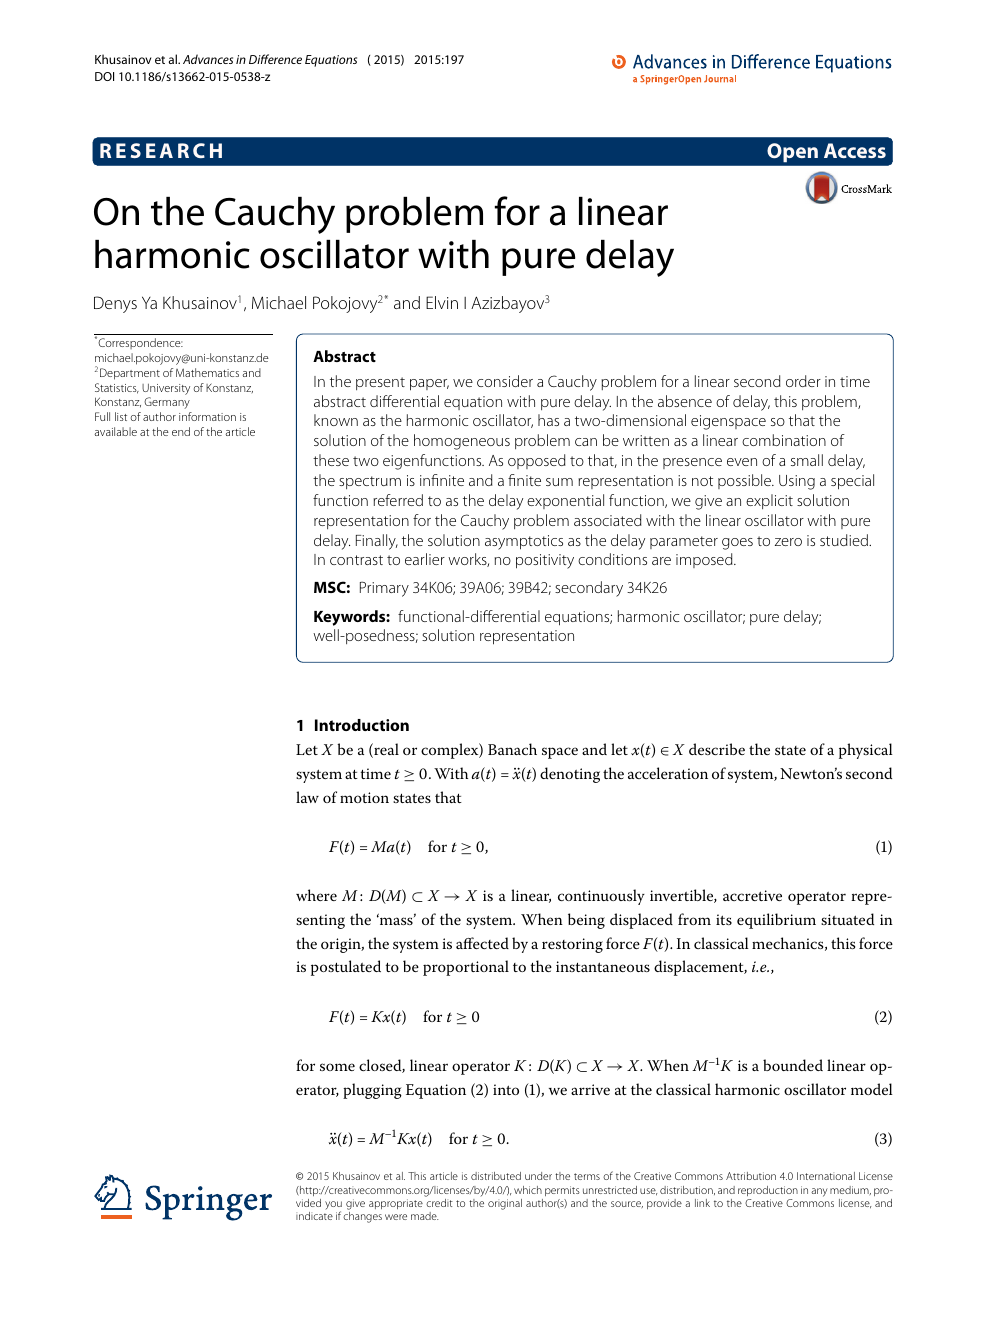 On The Cauchy Problem For A Linear Harmonic Oscillator With Pure Delay Topic Of Research Paper In Mathematics Download Scholarly Article Pdf And Read For Free On Cyberleninka Open Science Hub